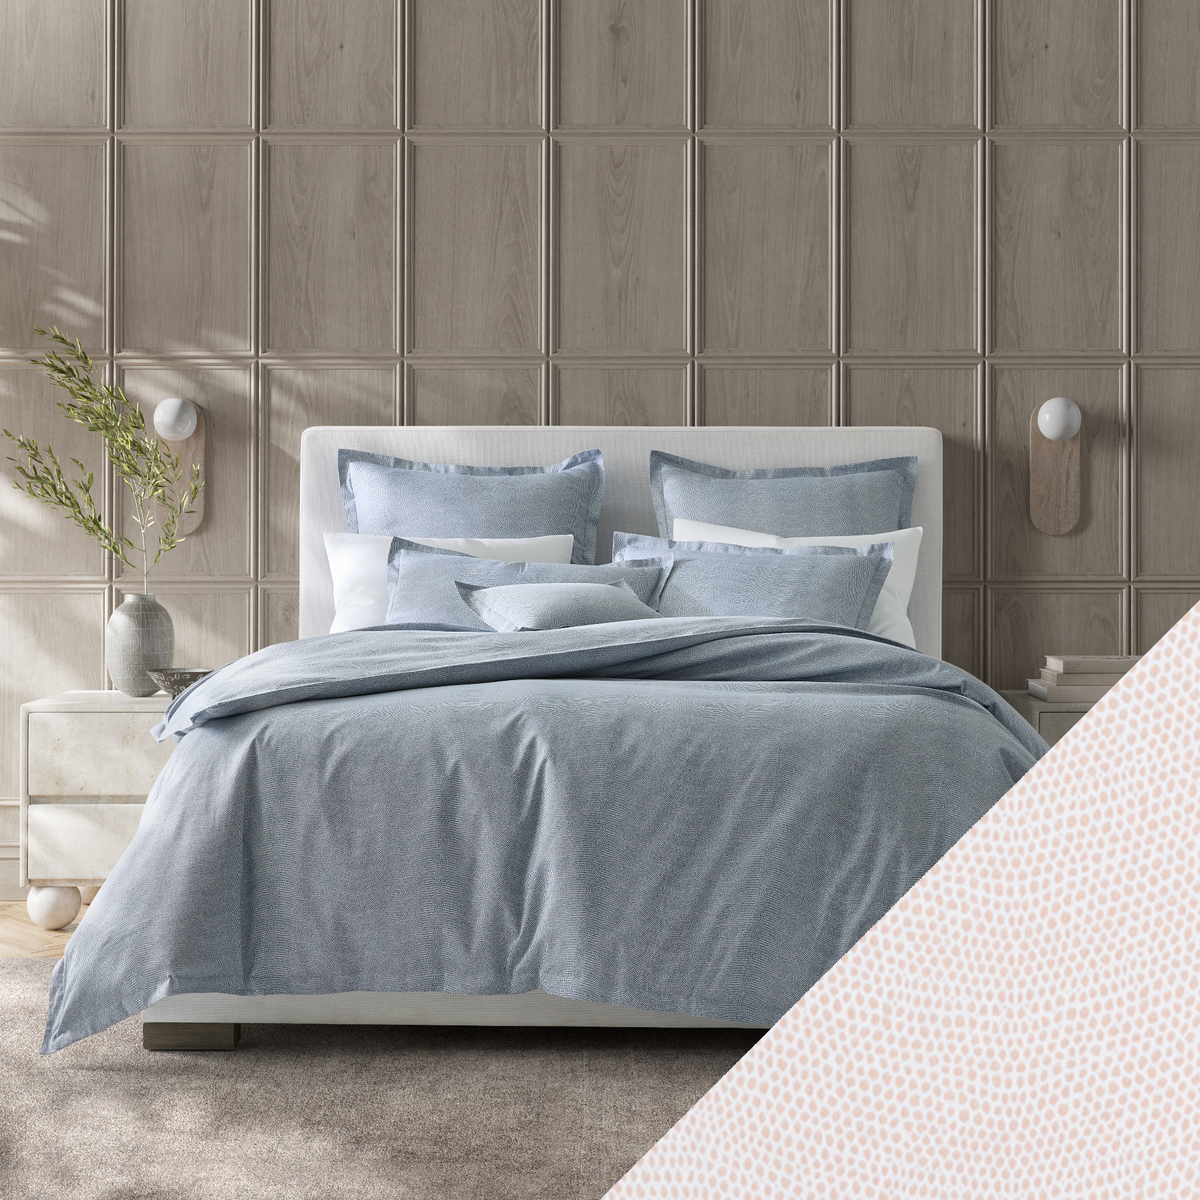 Full Bed Dressed in Steel Blue Matouk Jasper Bedding with Pink Swatch